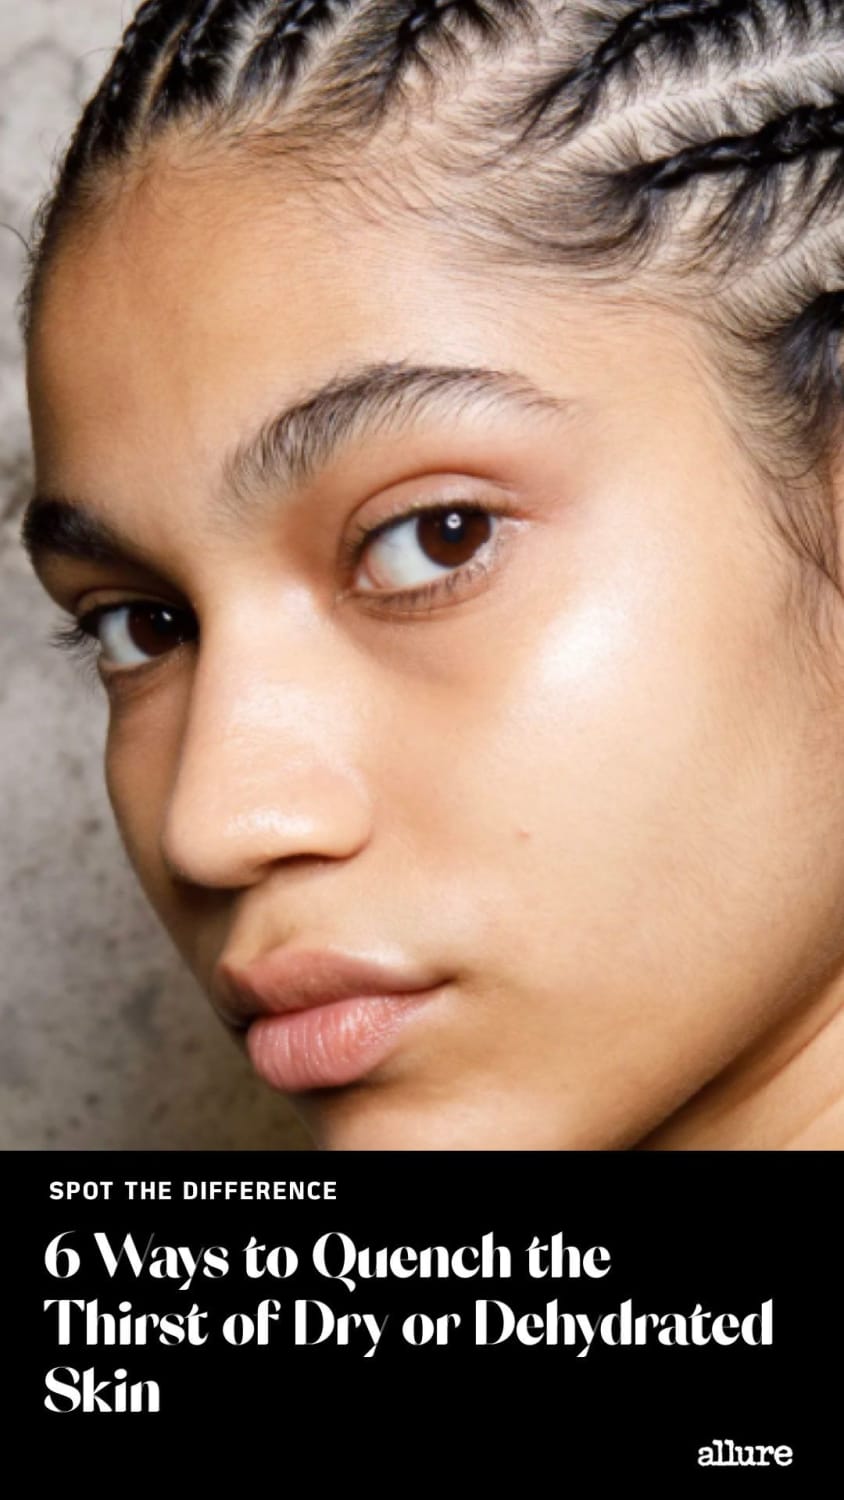 6 Ways to Quench the Thirst of Dry or Dehydrated Skin